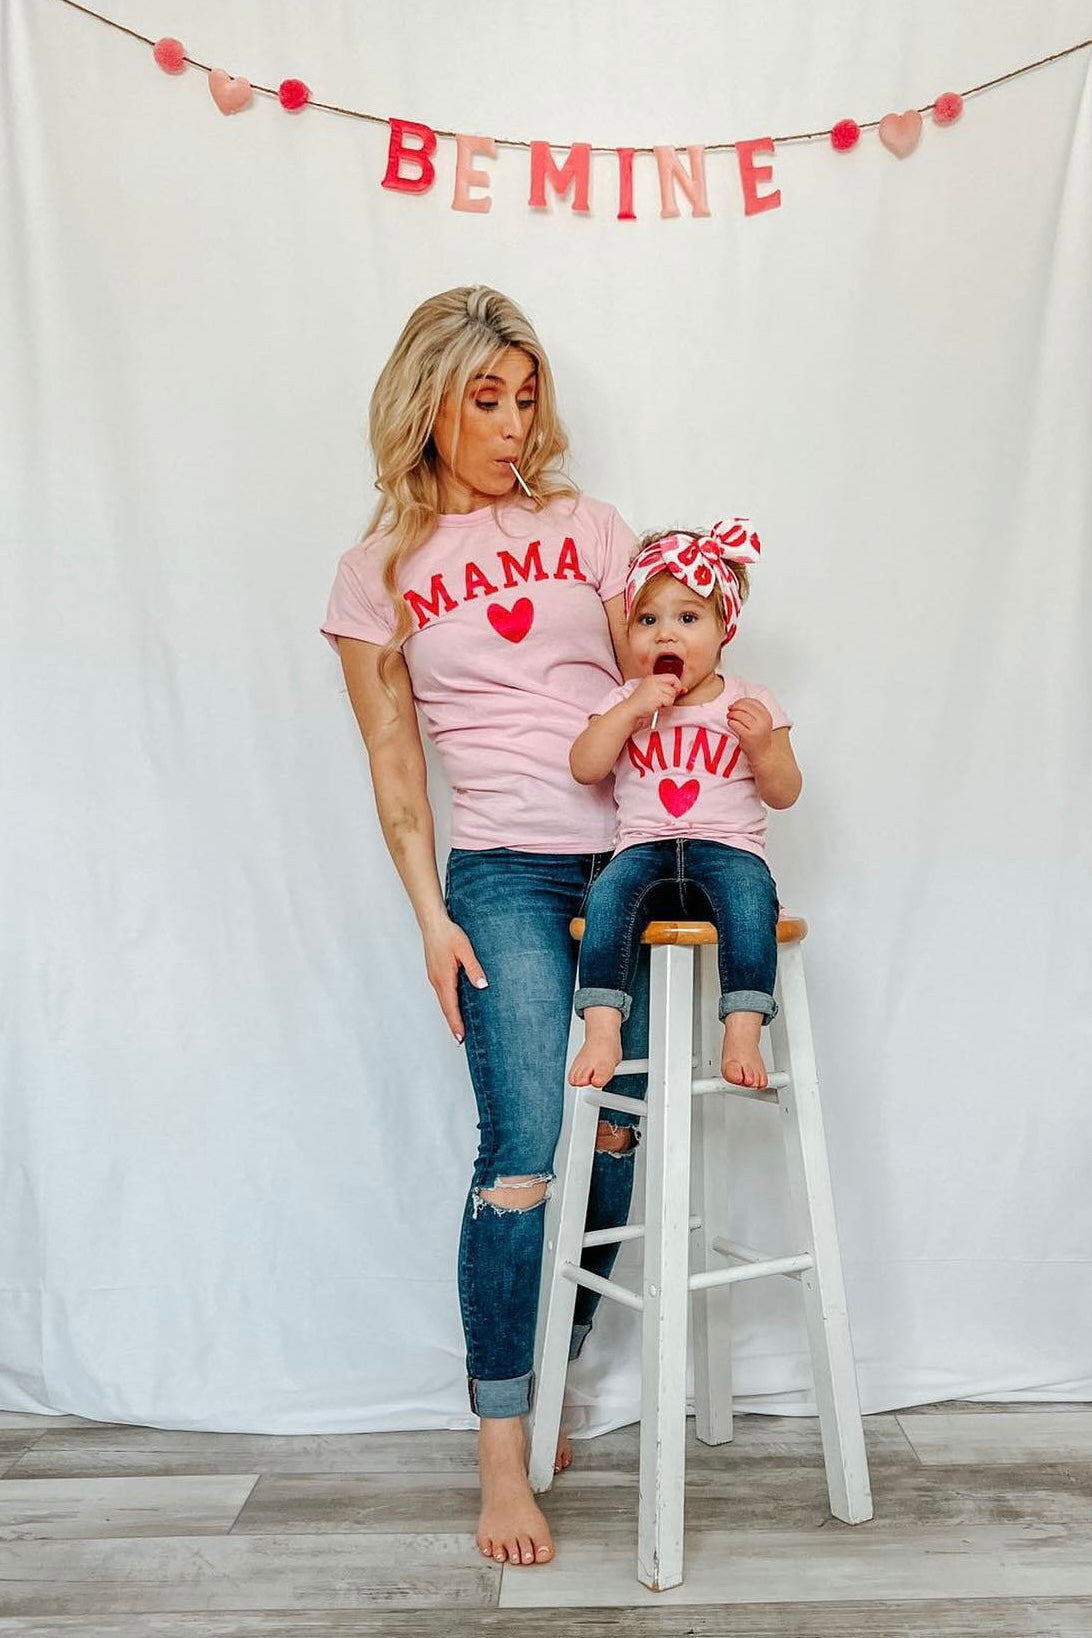 Mama and Mini Matching Light Pink and Red Valentines Day T-Shirt Set